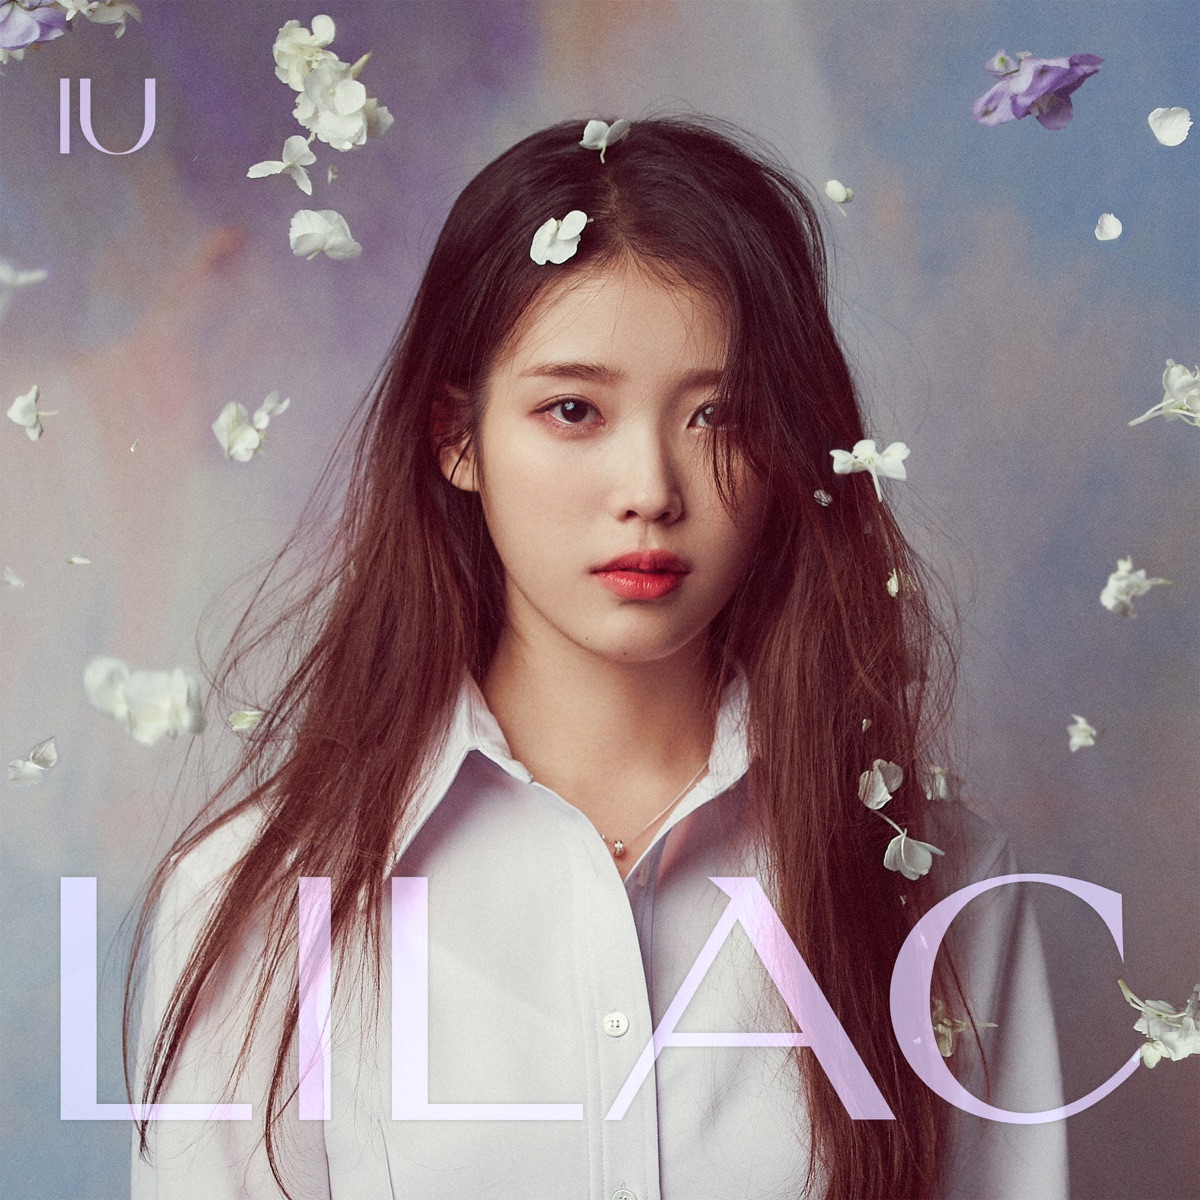 Cover for『IU - Ah puh』from the release『IU 5th Album 'Lilac'』